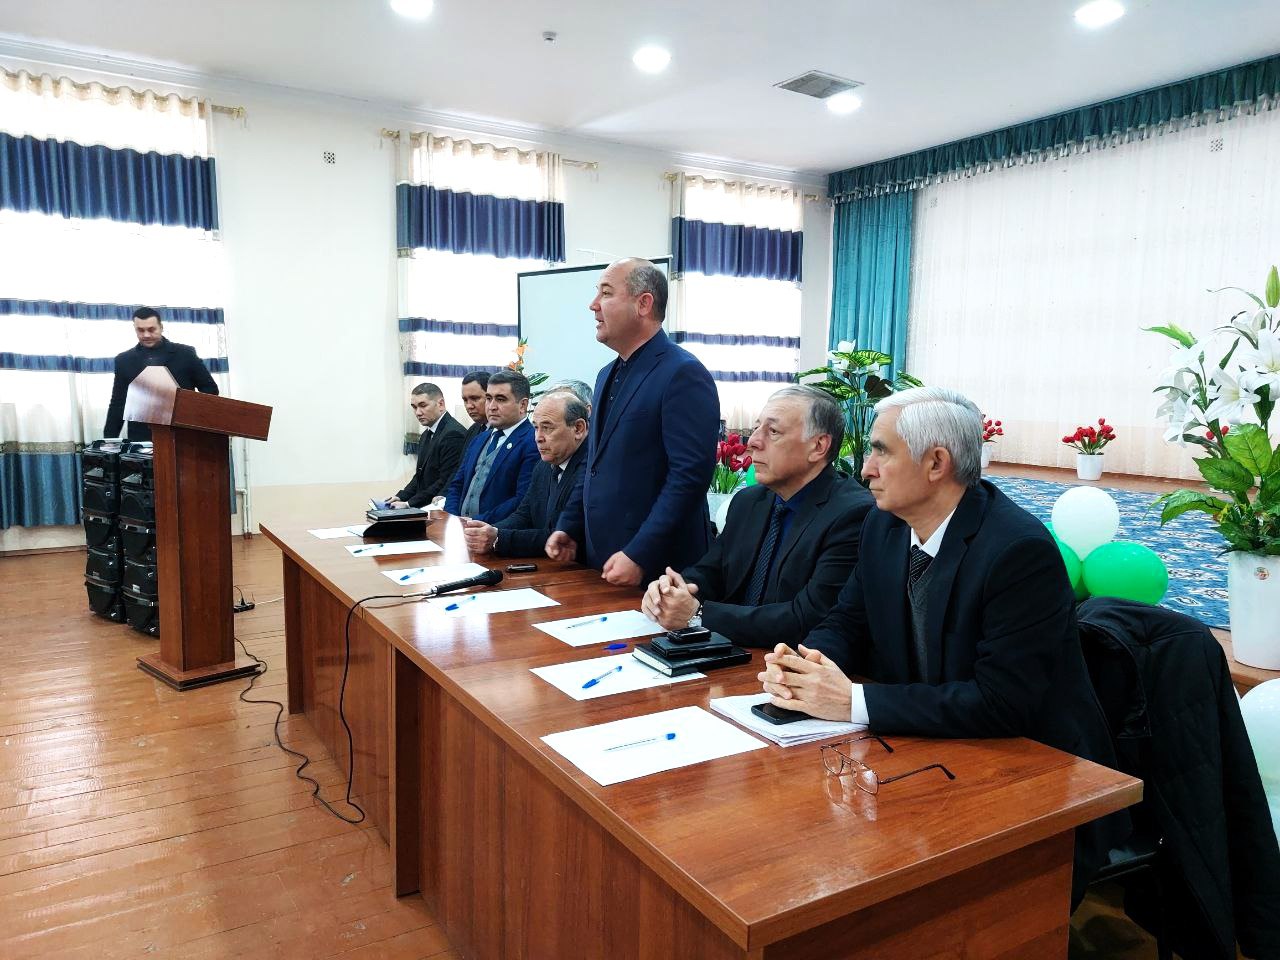 THE COOPERATION OF THE SECONDARY SCHOOL AND HIGHER INSTITUTIONS IS STRENGTHENING